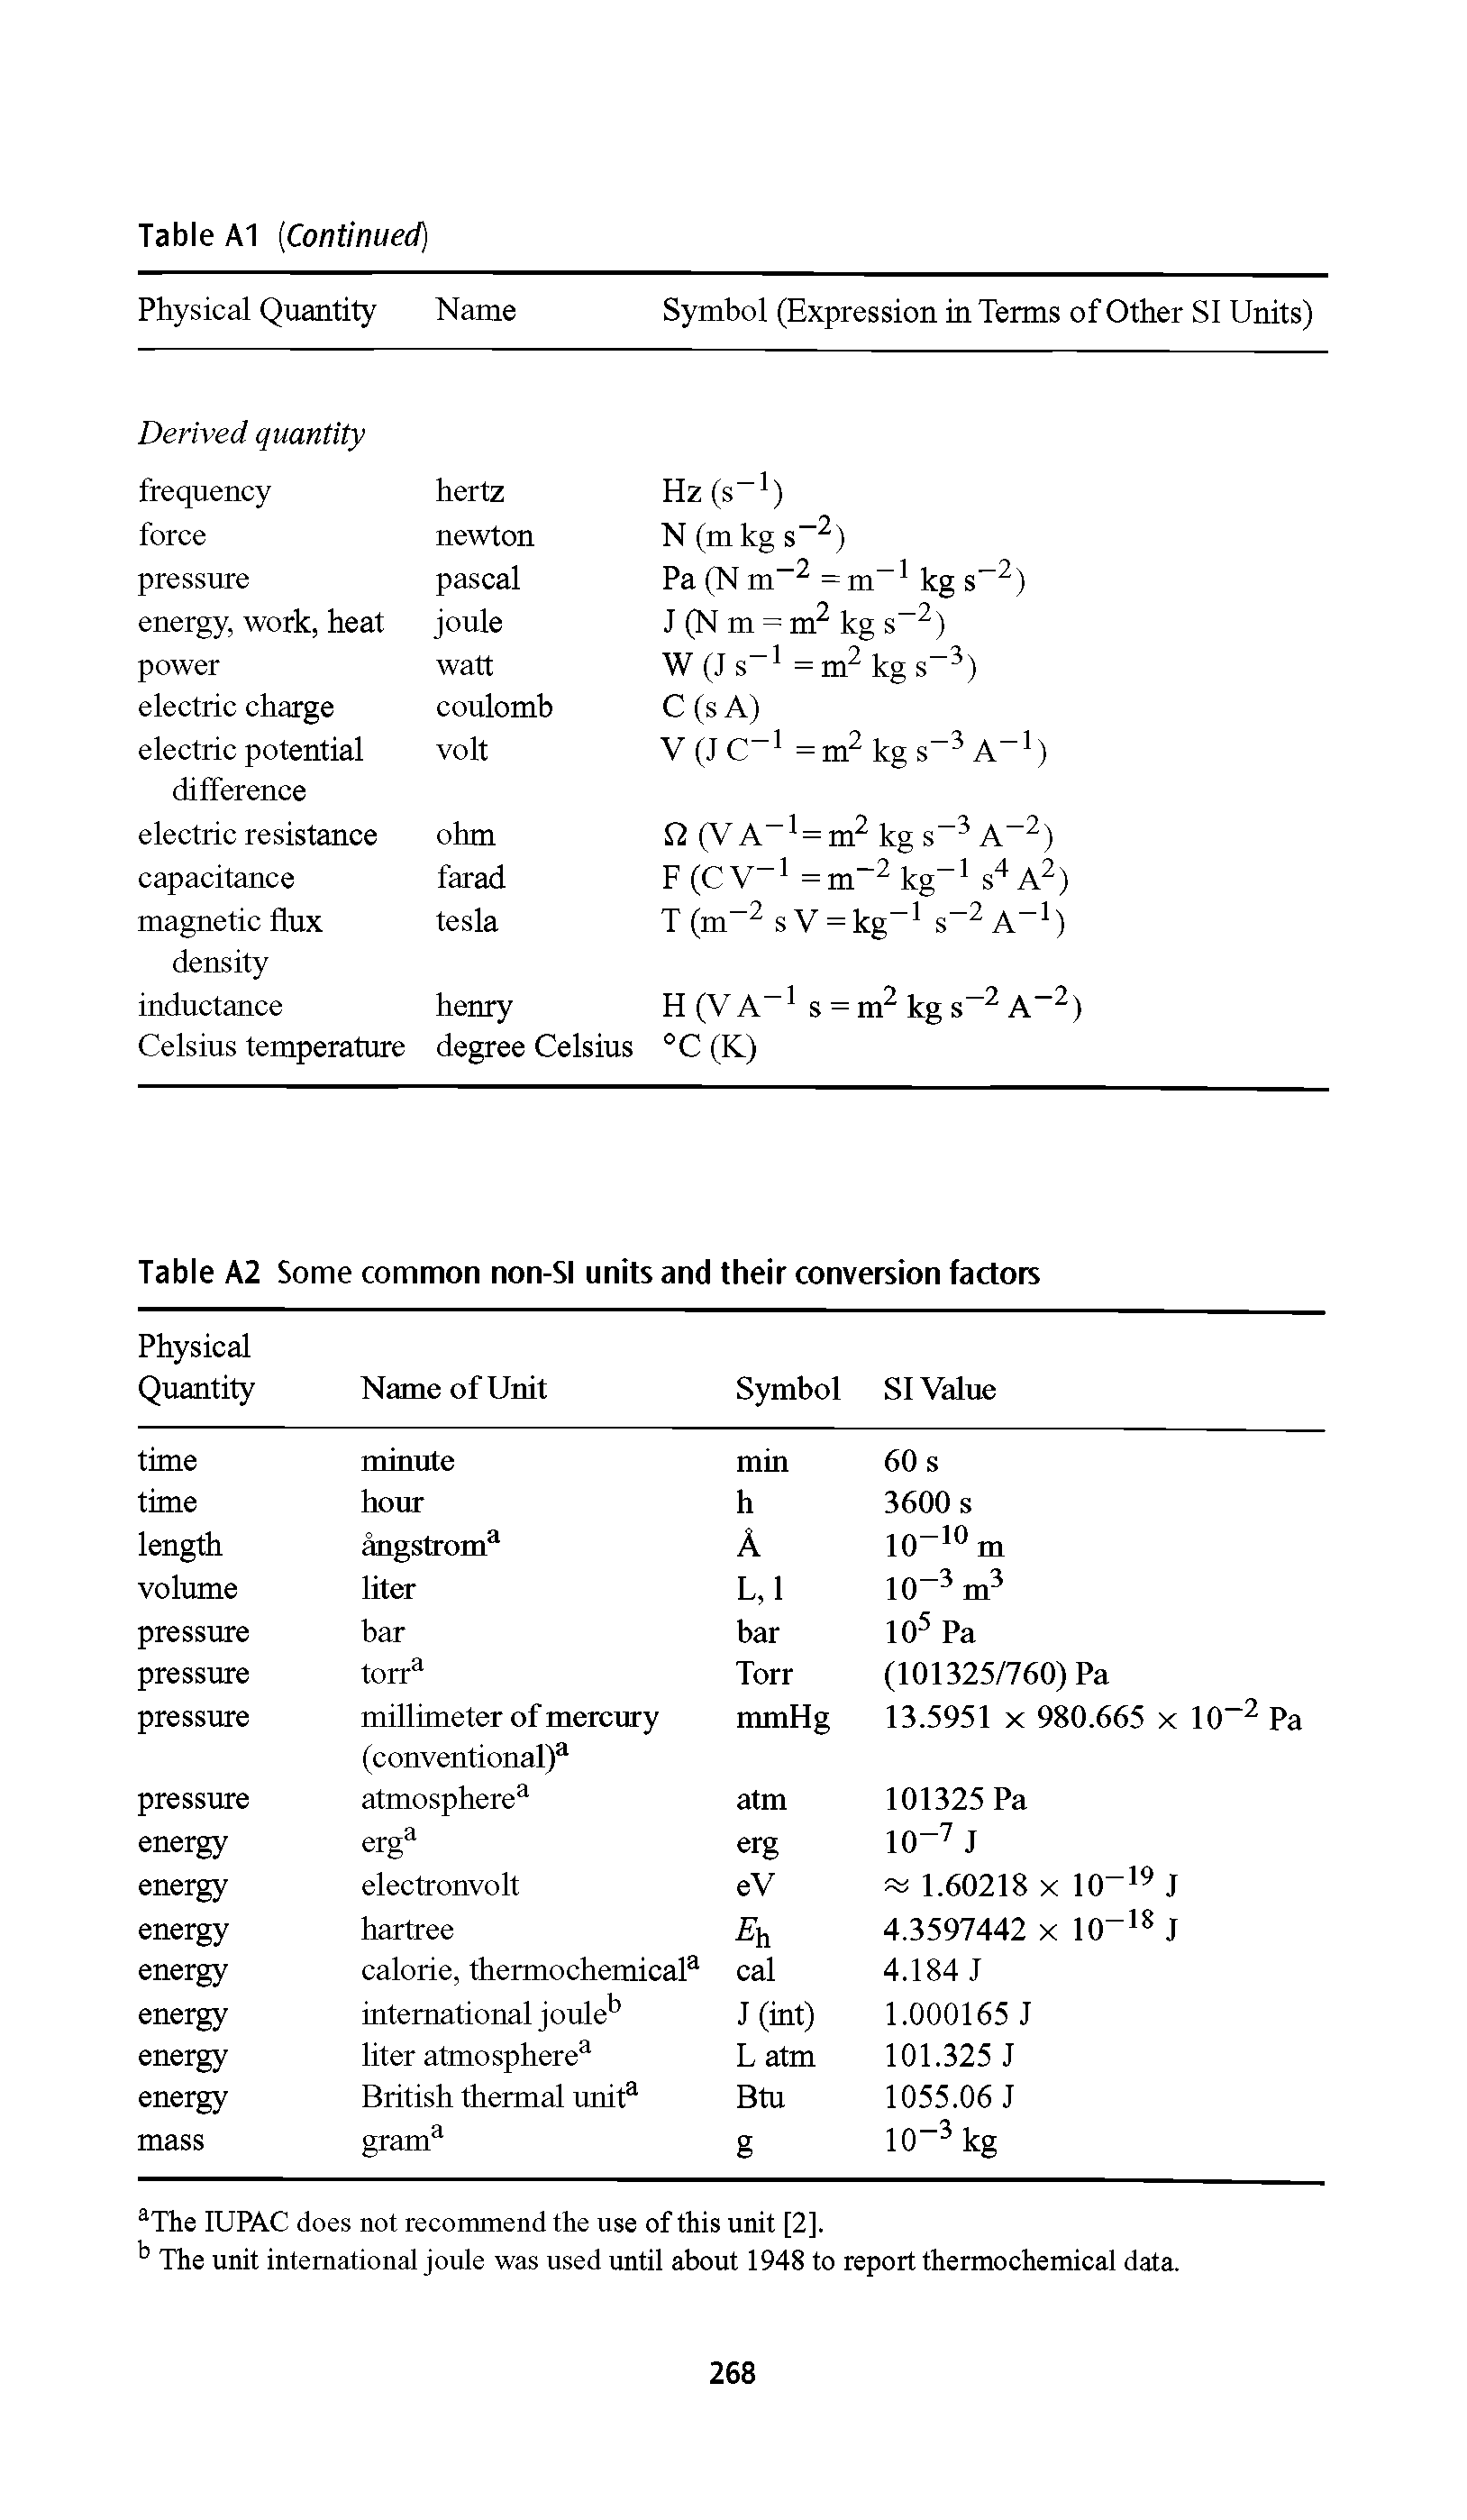 Table A2 Some common non-SI units and their conversion factors...